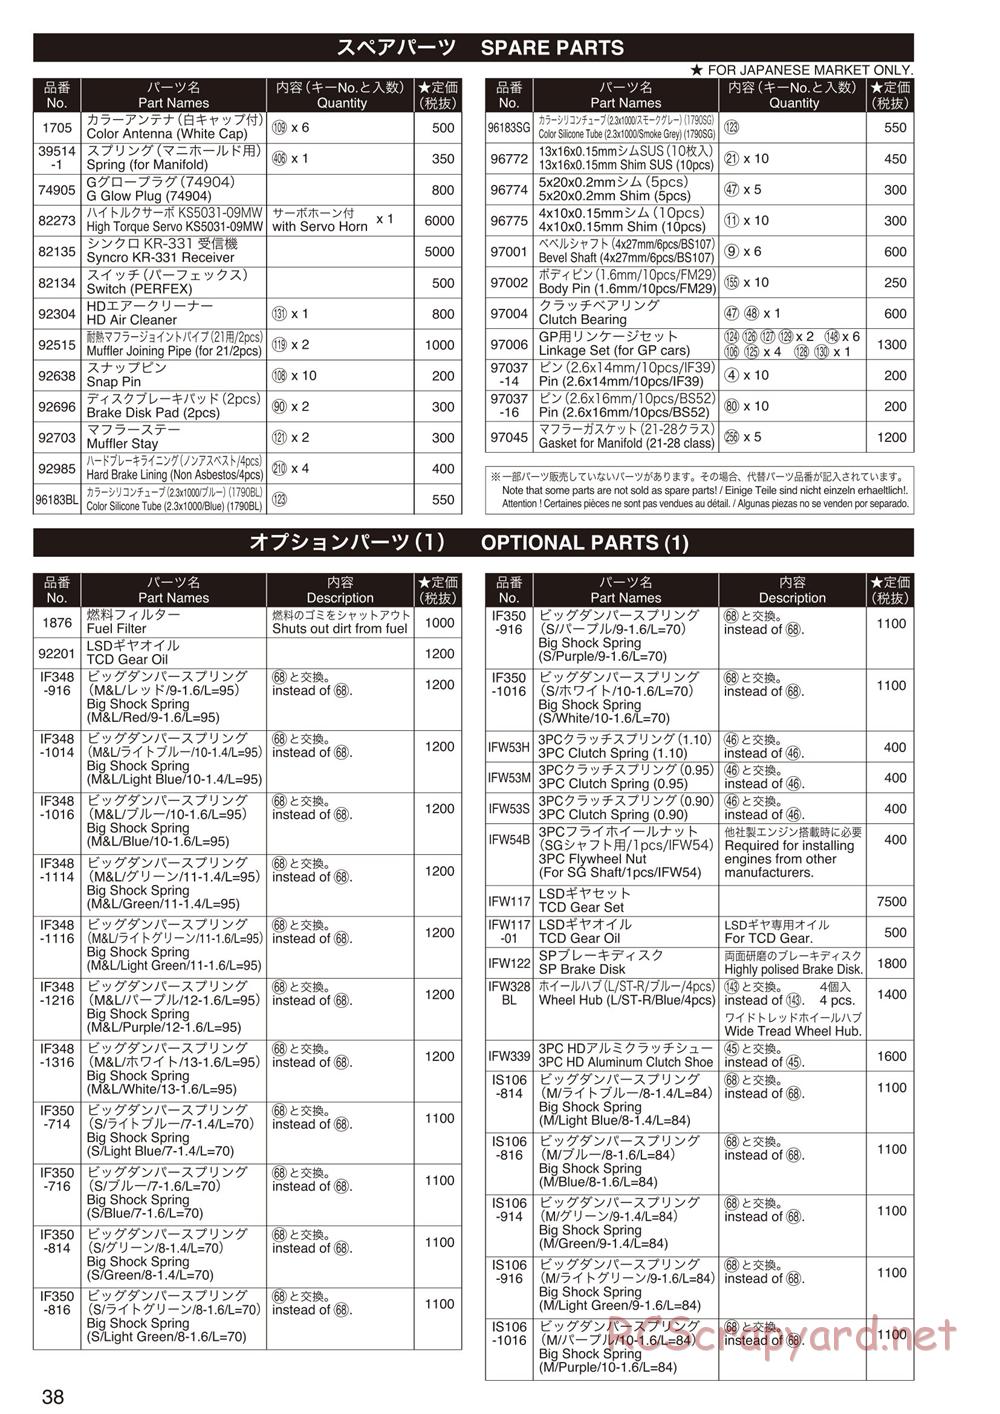 Kyosho - Mad Force Kruiser 2.0 - Parts List - Page 2